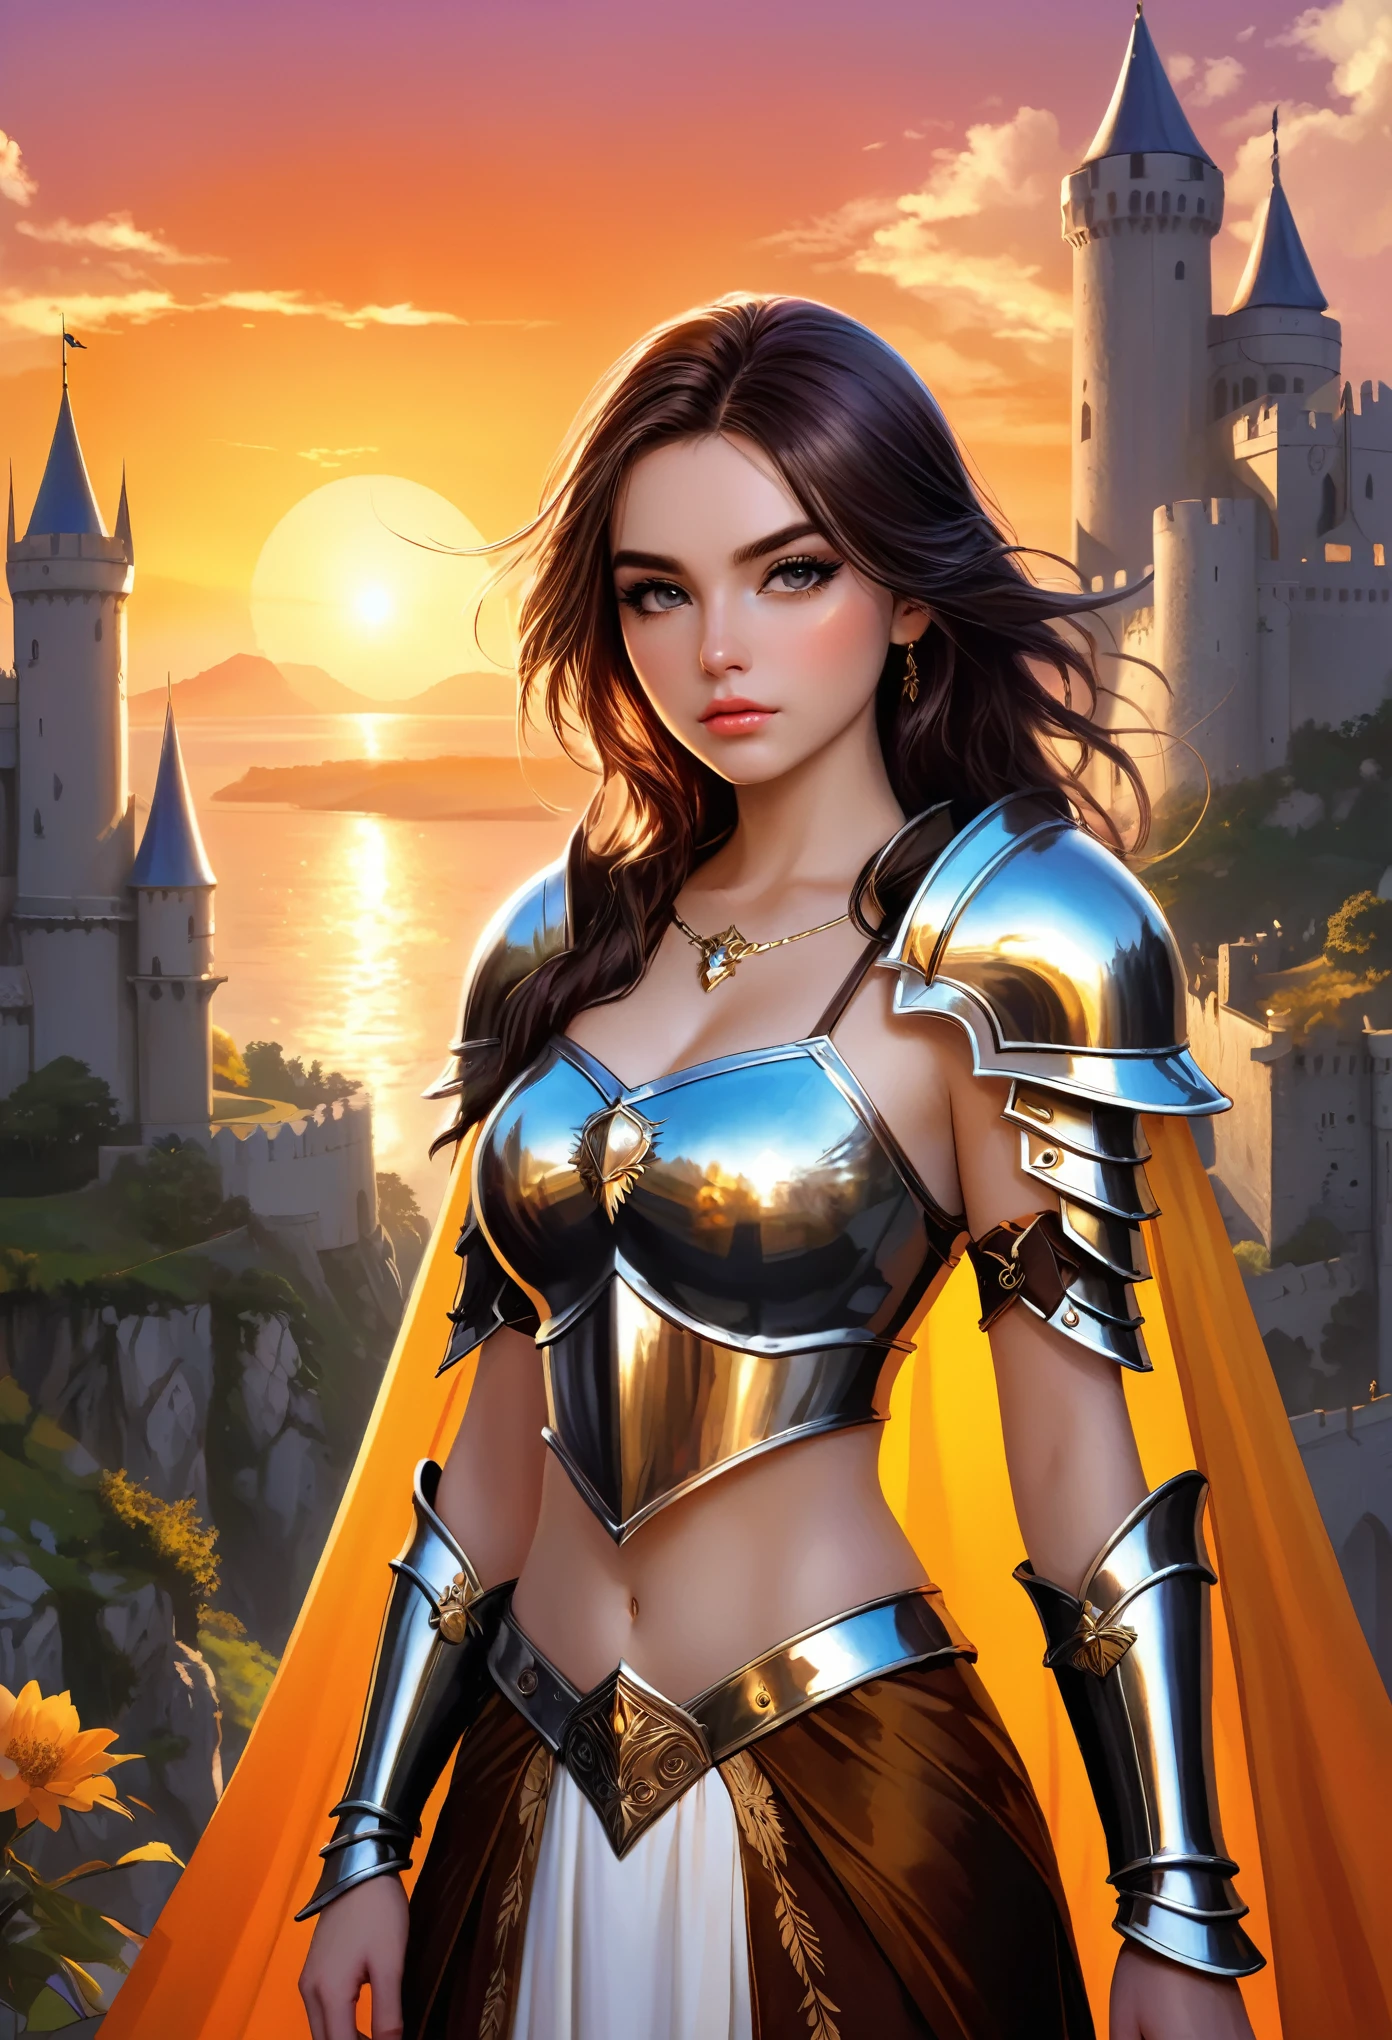 (masterpiece, top quality, best quality, official art, beautiful and aesthetic:1.2),(colorful:1.2),

(1girl:1.2),

beautiful face, pale face, black eyes, a pale warrior princess, woman  shining eyes, serious expression,blade right hand, cleavage, sexy, bikini armor

cape, embroidery,silver_armor, detailed medieval fortress in background, fantasy setting, sunset, sunny day

(translucent and dark orange colors:0.1), fantasy concept art, 